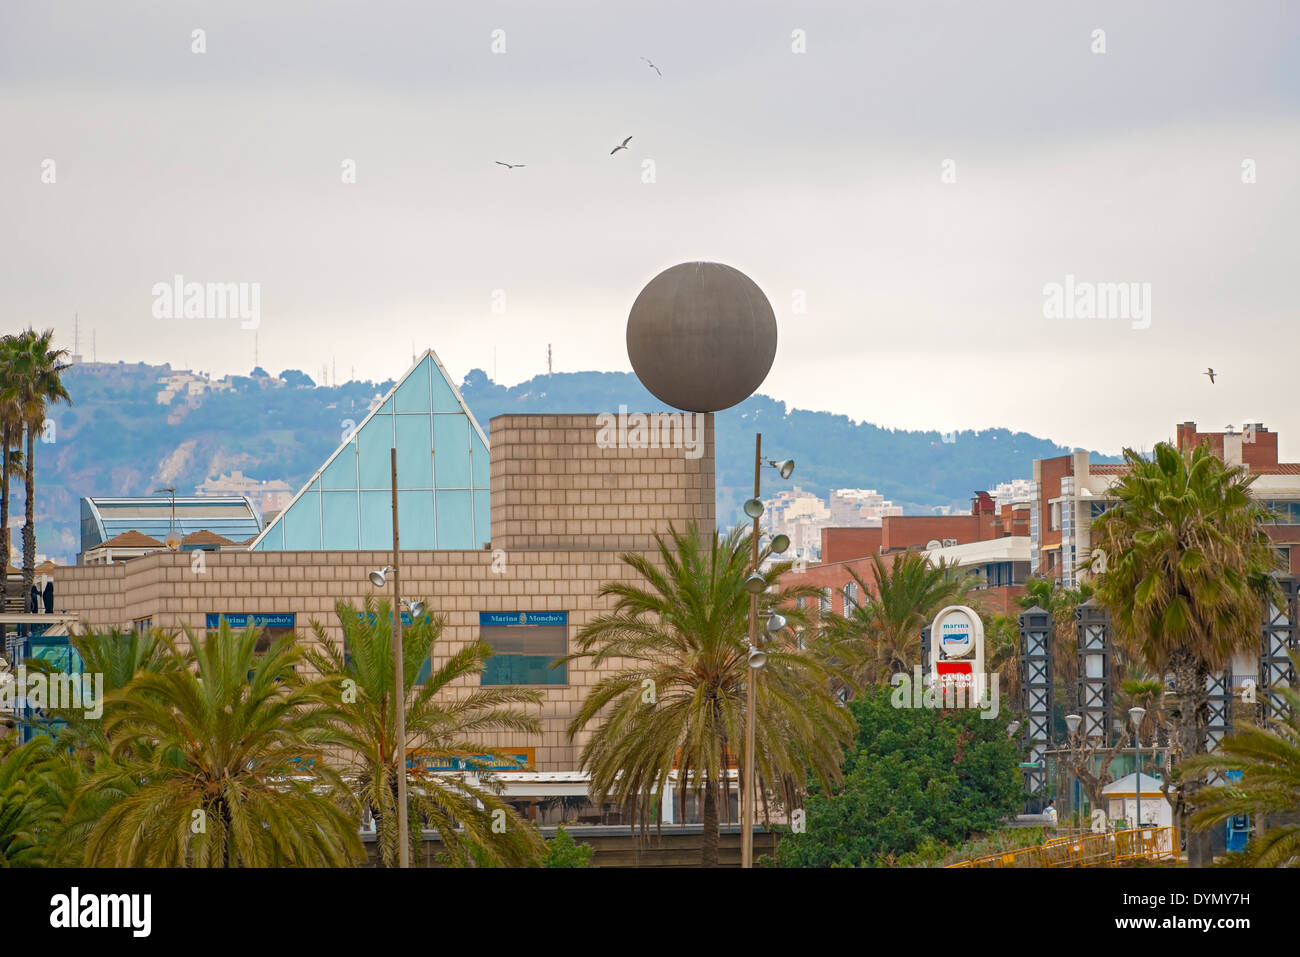 Barcelona, Spain - January 25, 2014: Detail of the Port Olimpic Village in Barcelona with the big sphere sculpture Stock Photo